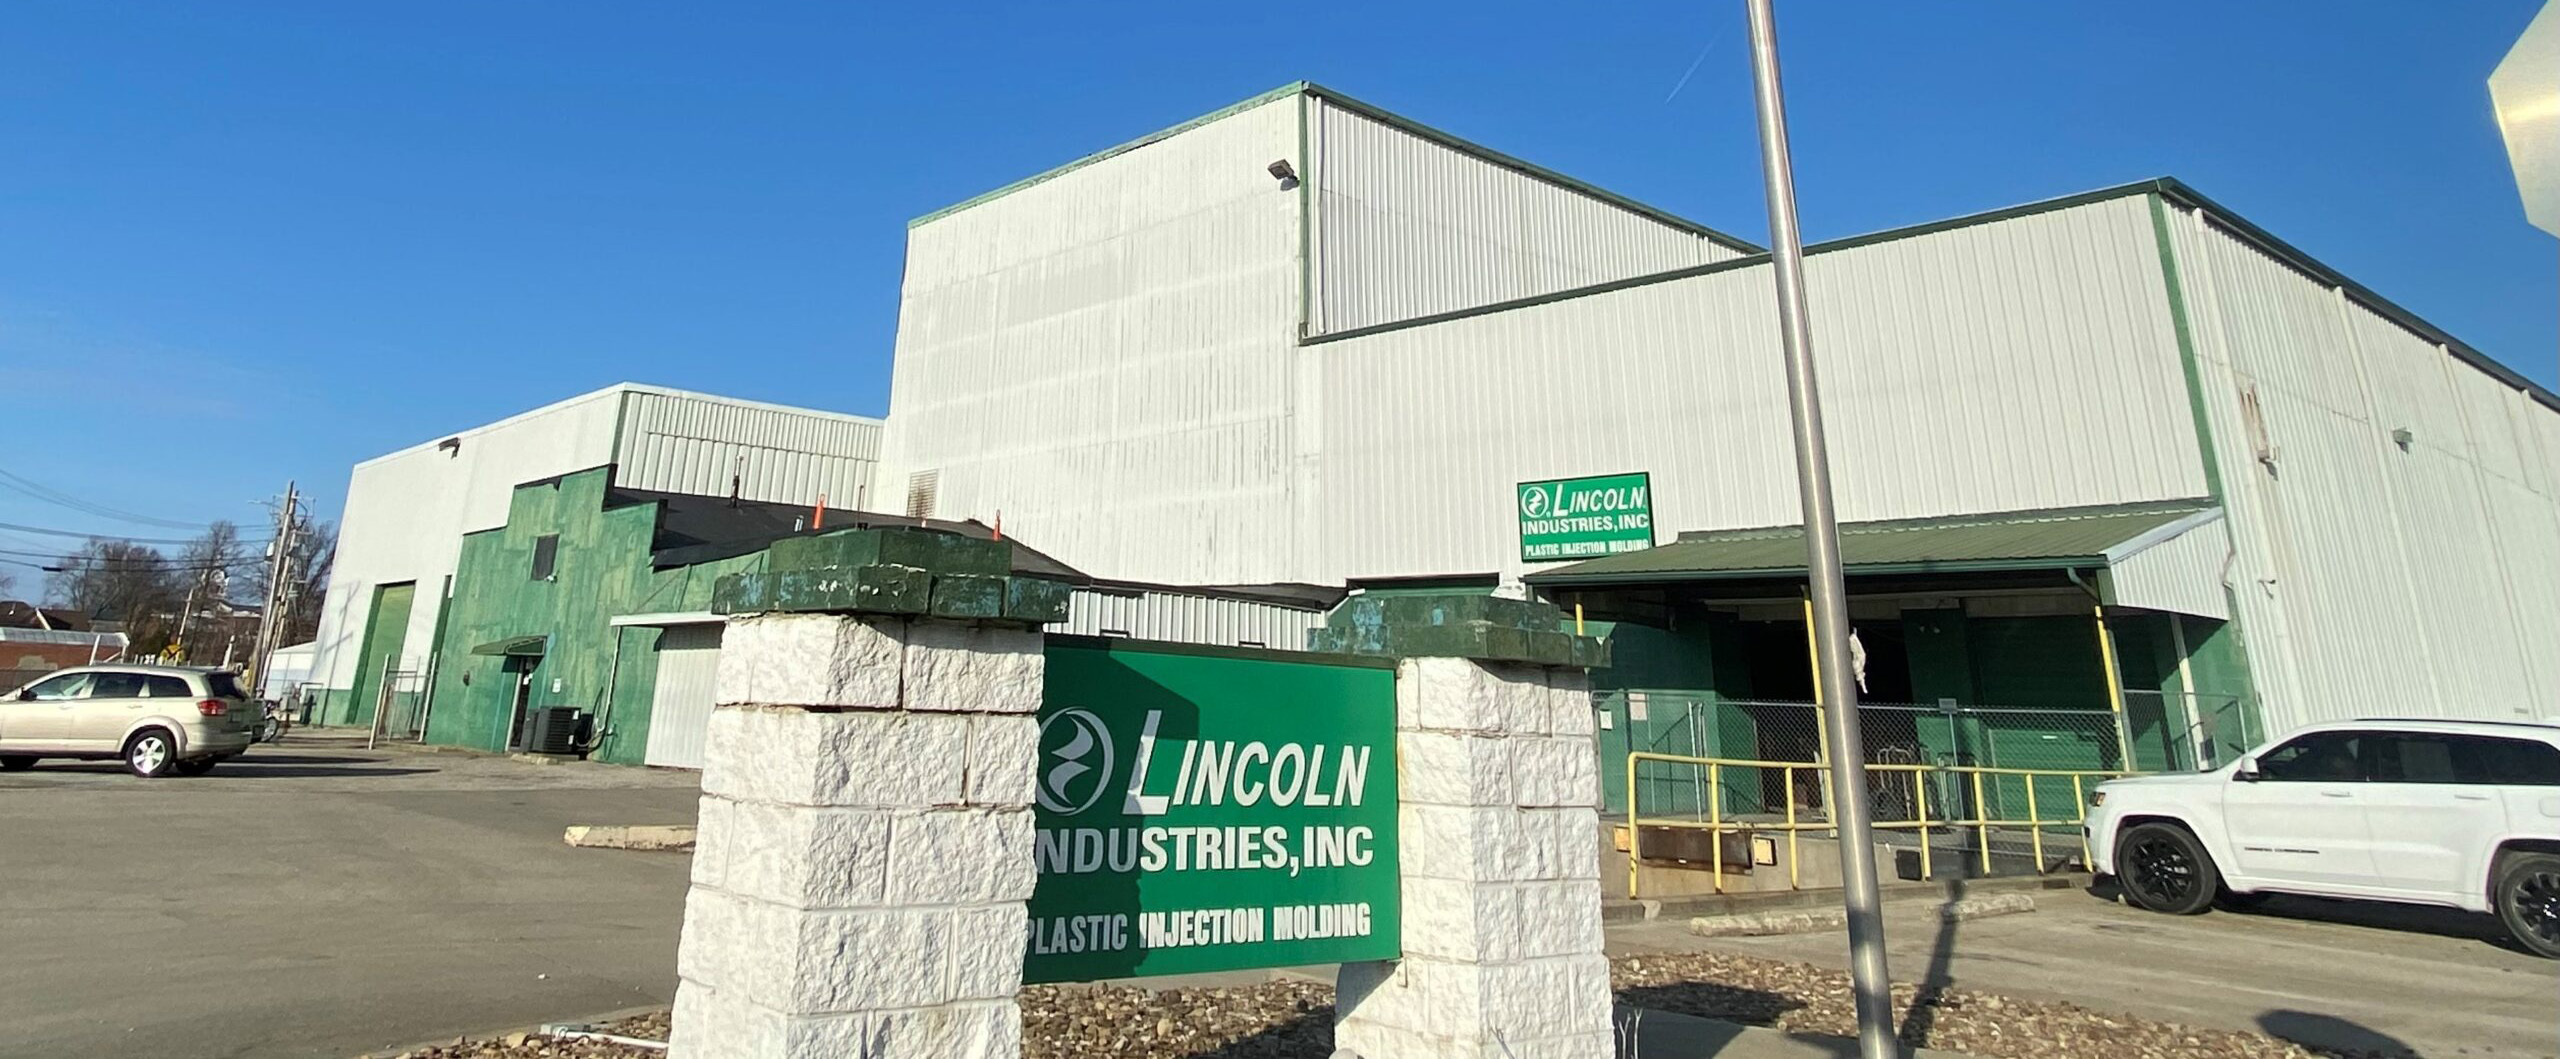 Lincoln Factory Entrance